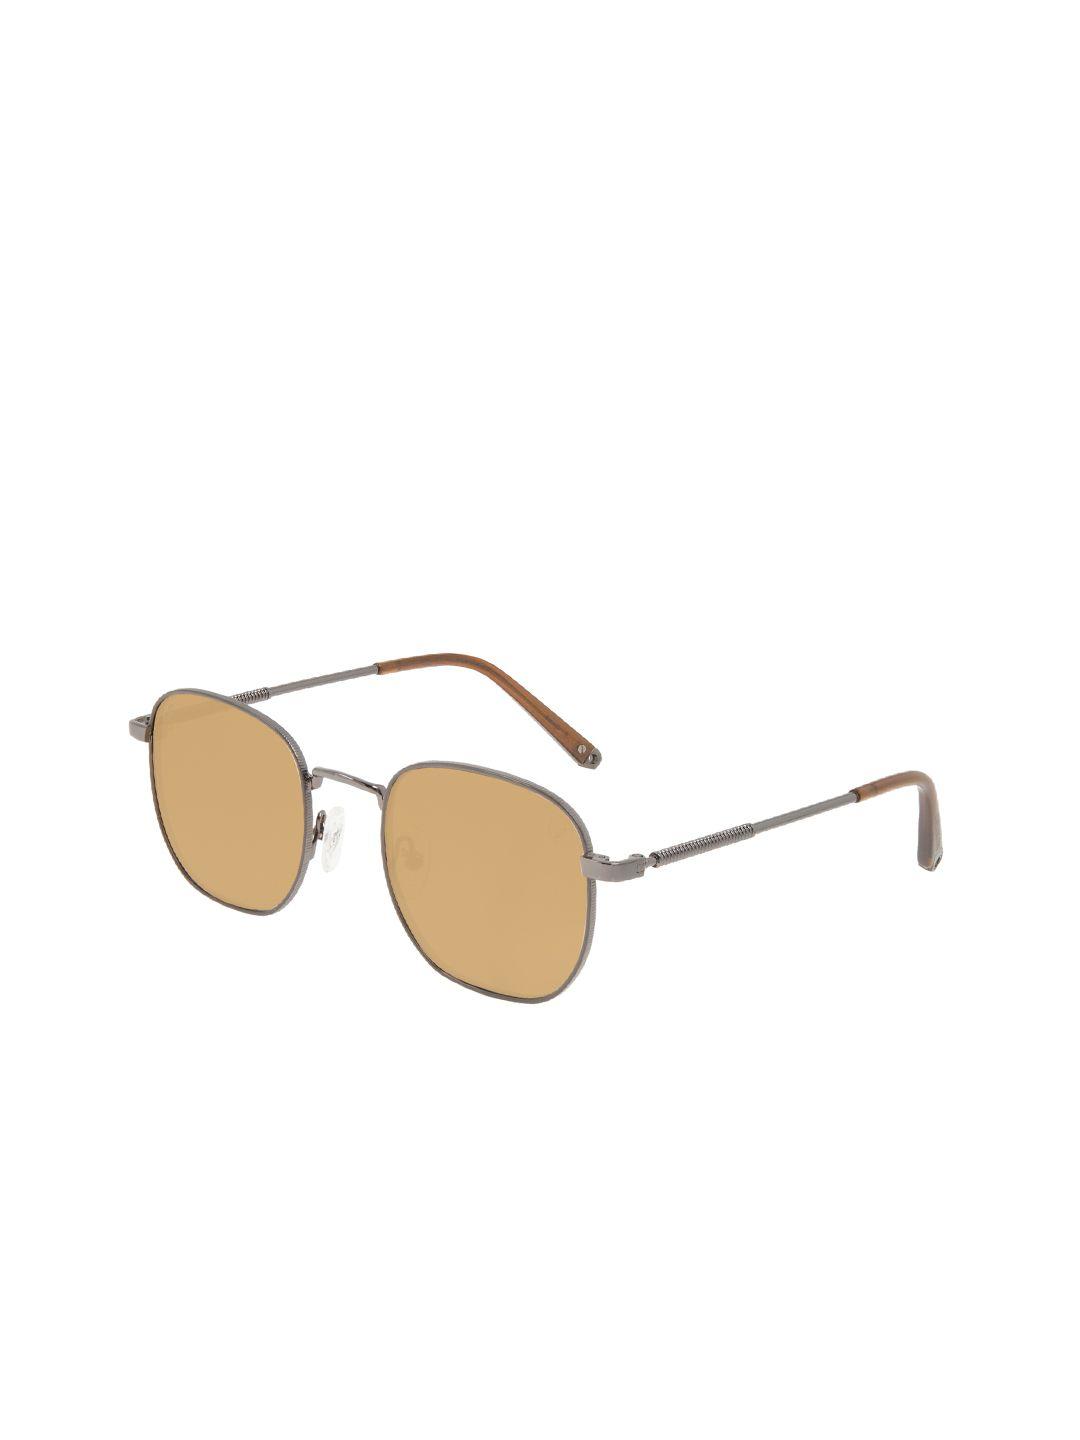 chilli beans unisex brown lens & black round sunglasses with uv protected lens